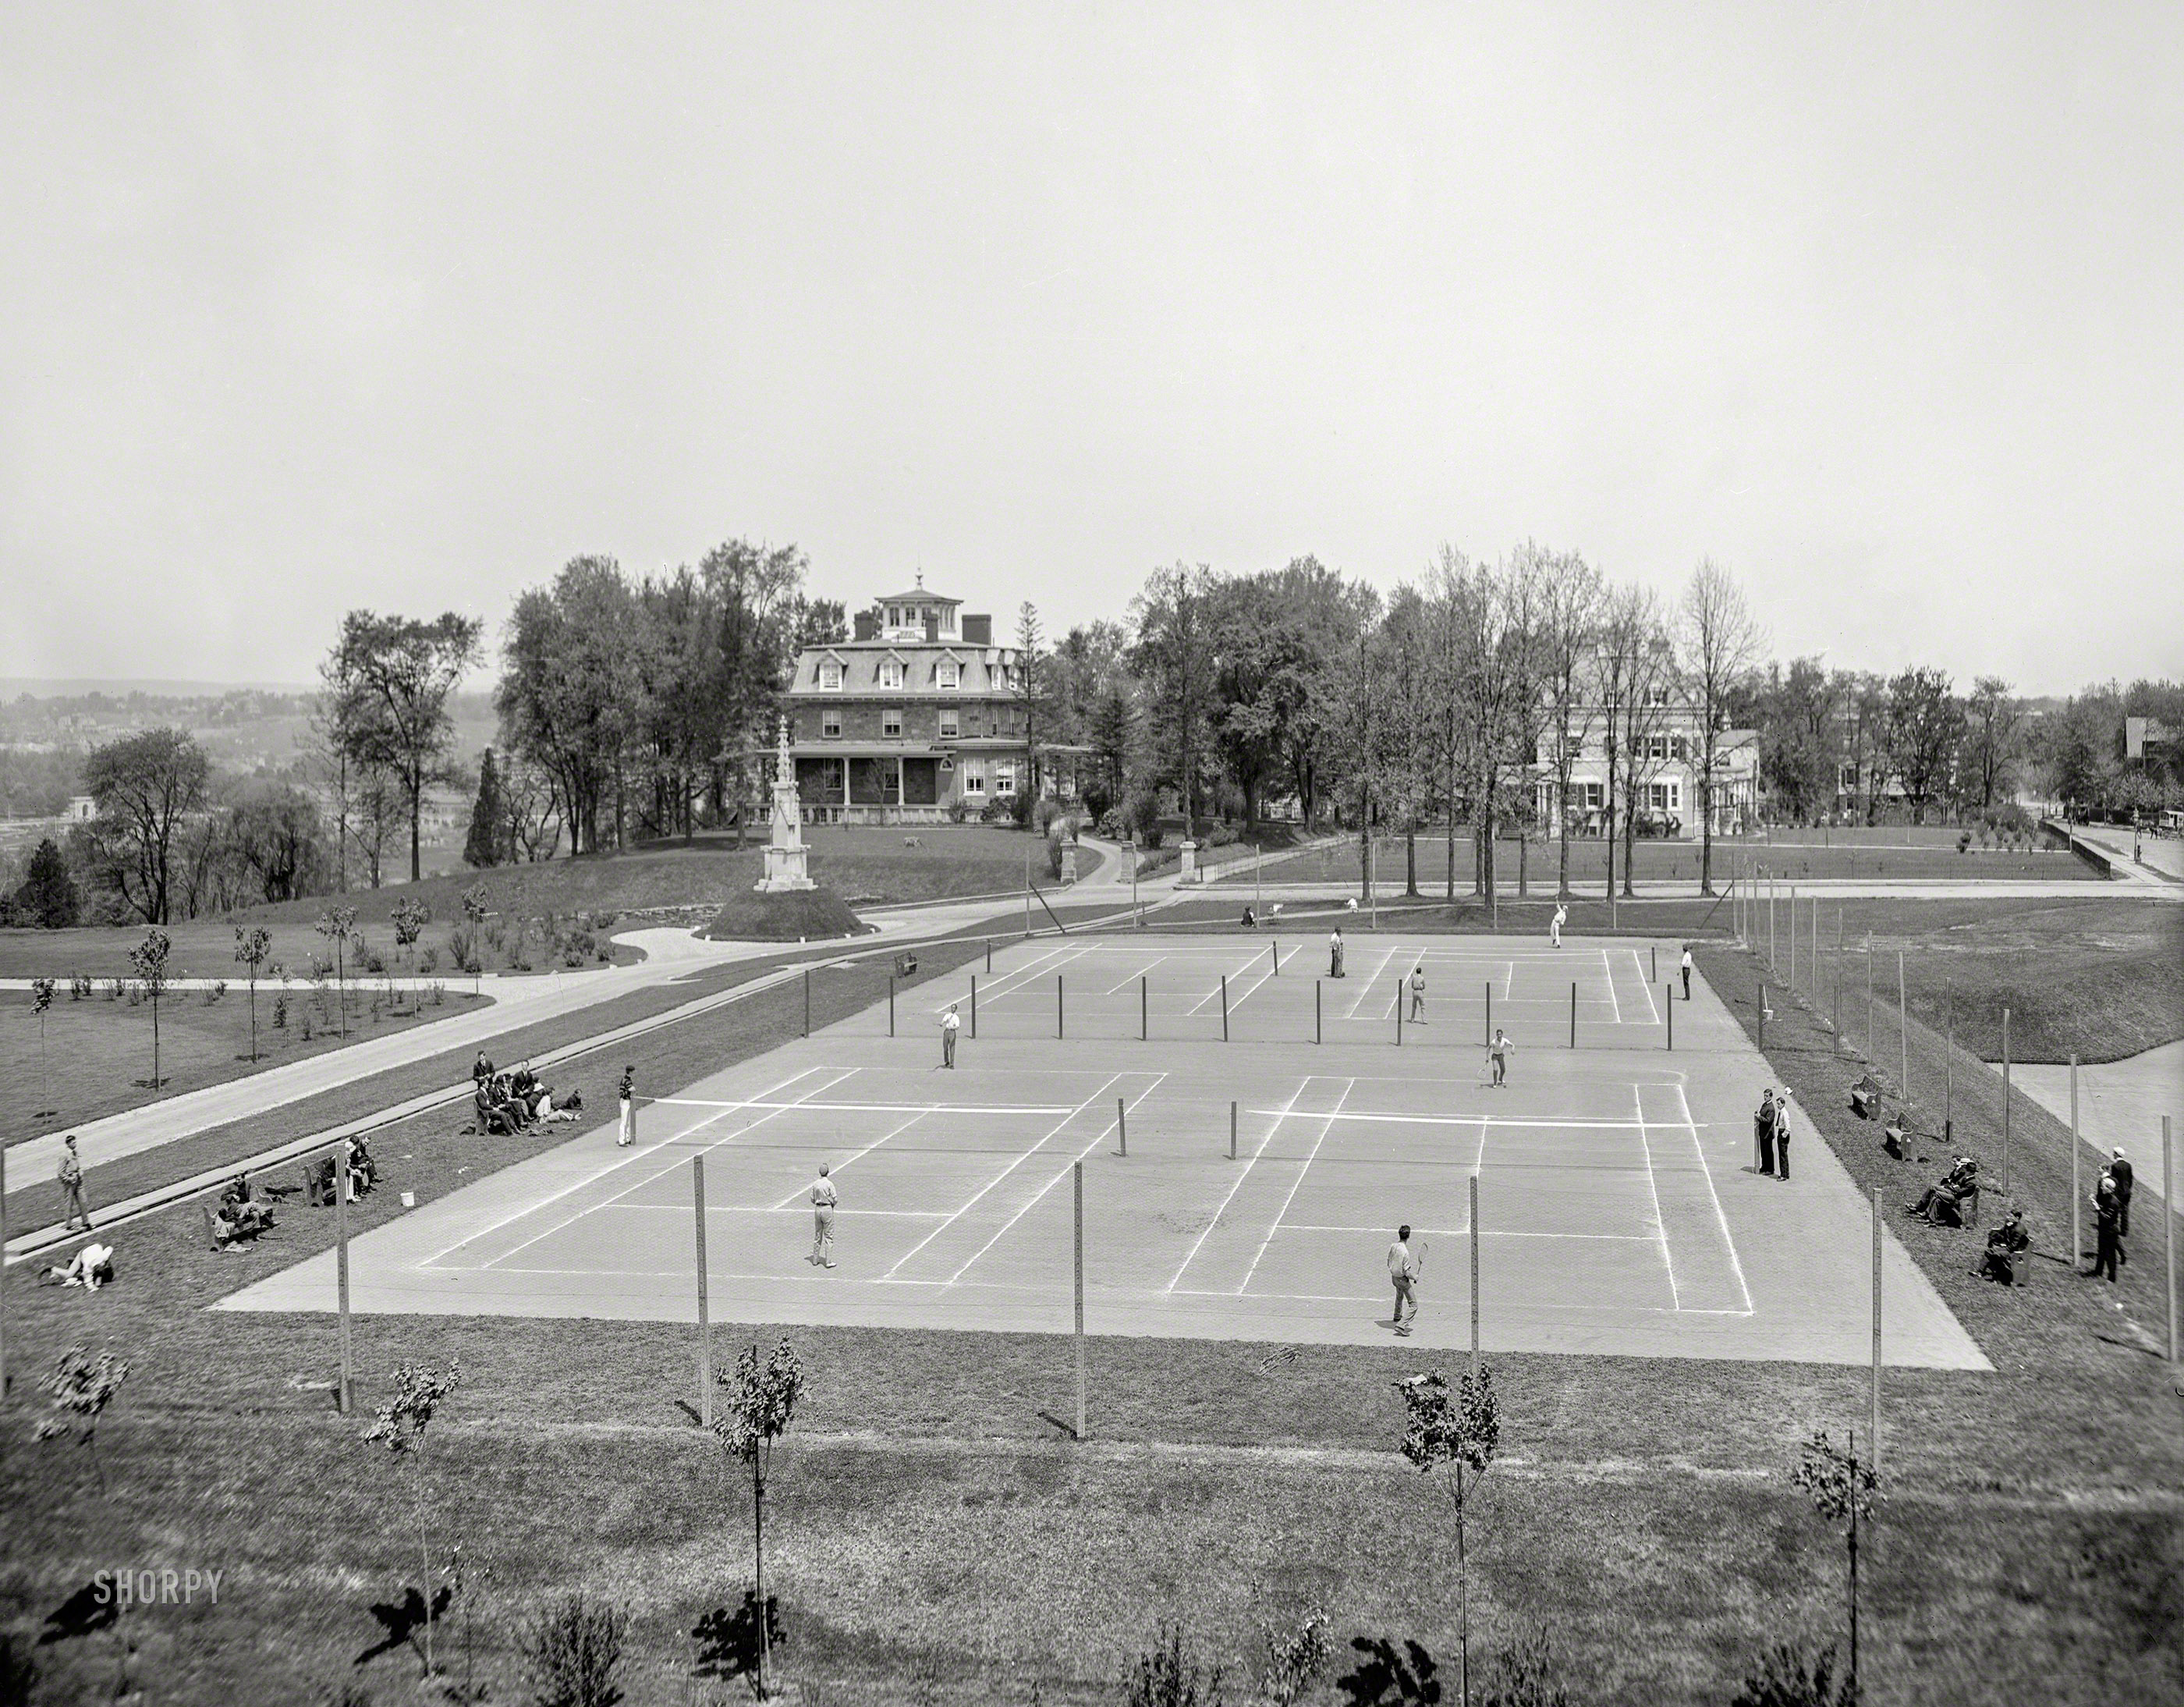 The Bronx circa 1904. "Tennis courts at New York University." 8x10 inch dry plate glass negative, Detroit Photographic Company. View full size.